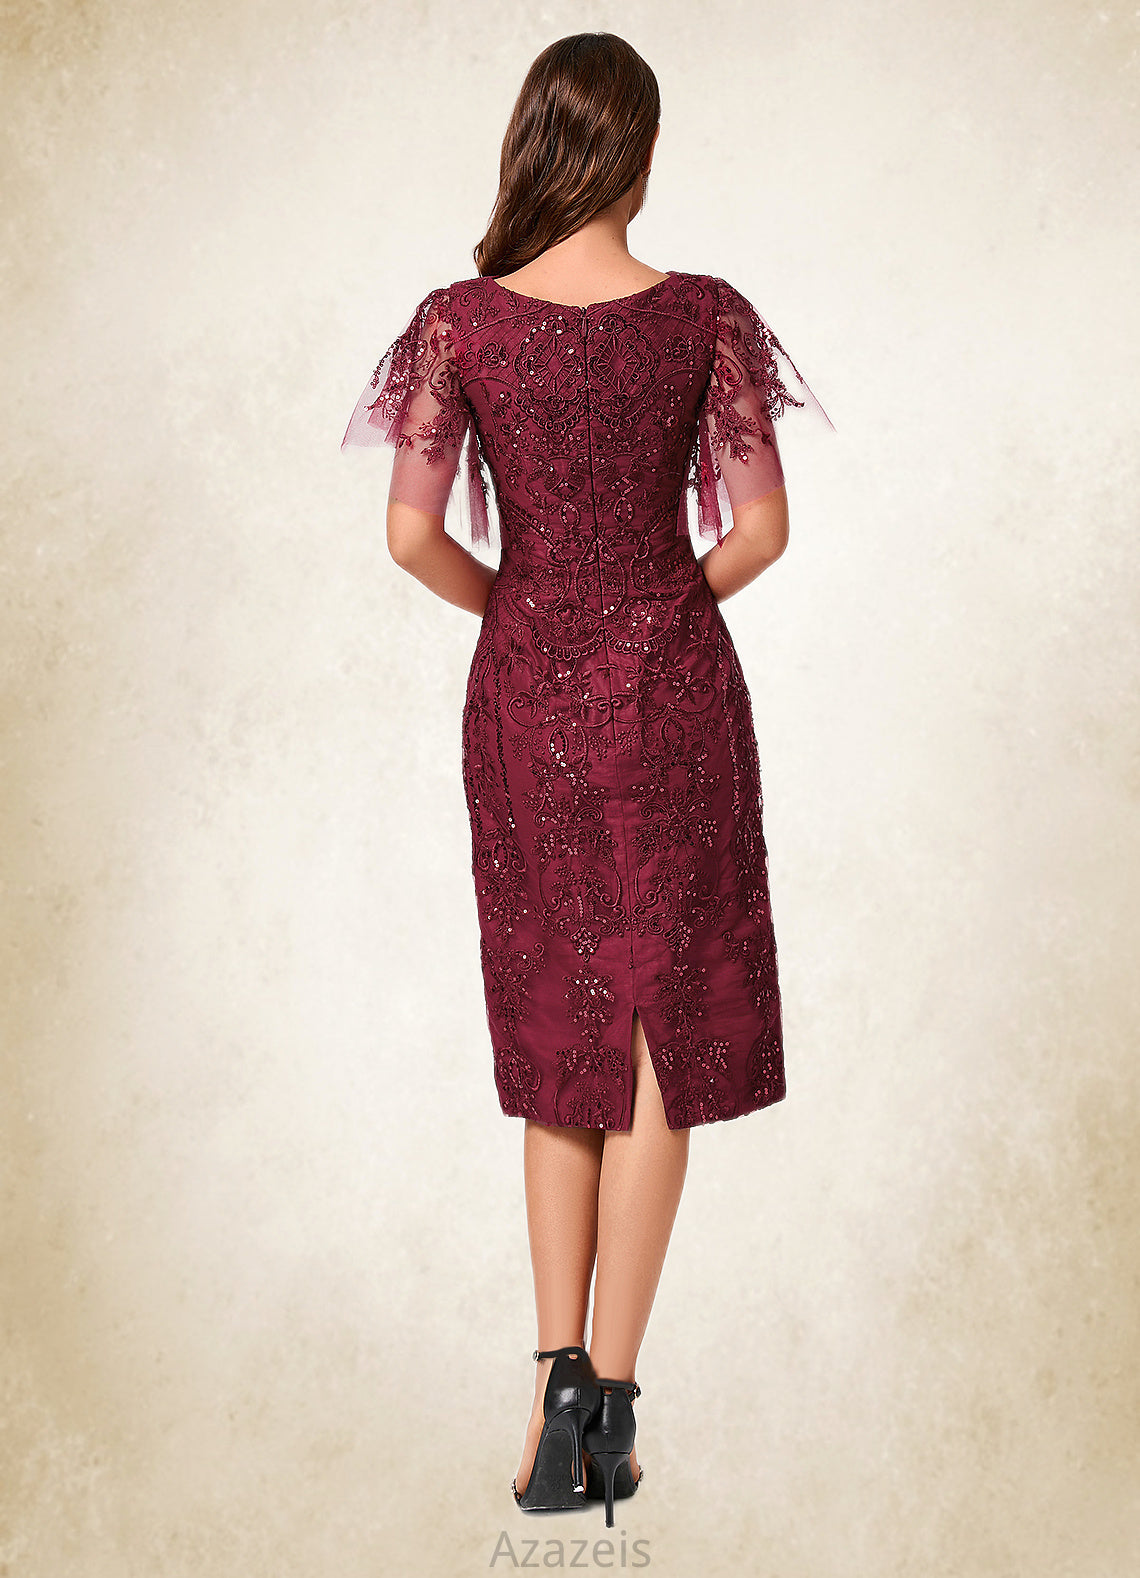 Hillary A-line Off the Shoulder Knee-Length Lace Sequin Cocktail Dress With Sequins DFP0022420